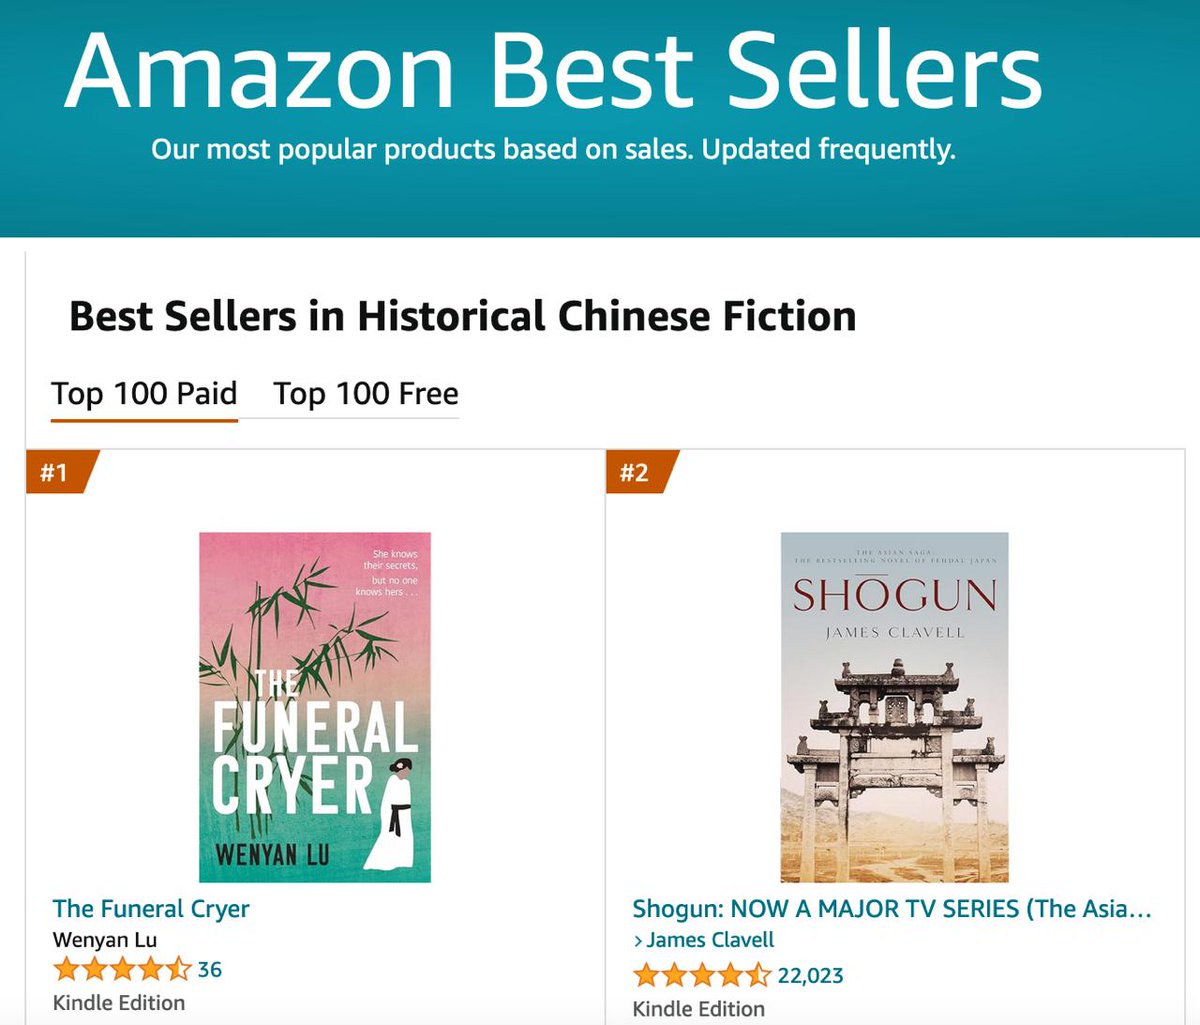 #1 now on @kobo Cultural Heritage in Fiction&Literature ebook, paired with #1 on @amazon Kindle in Historical Chinese Fiction! What a day! #TheFuneralCryer ❤️